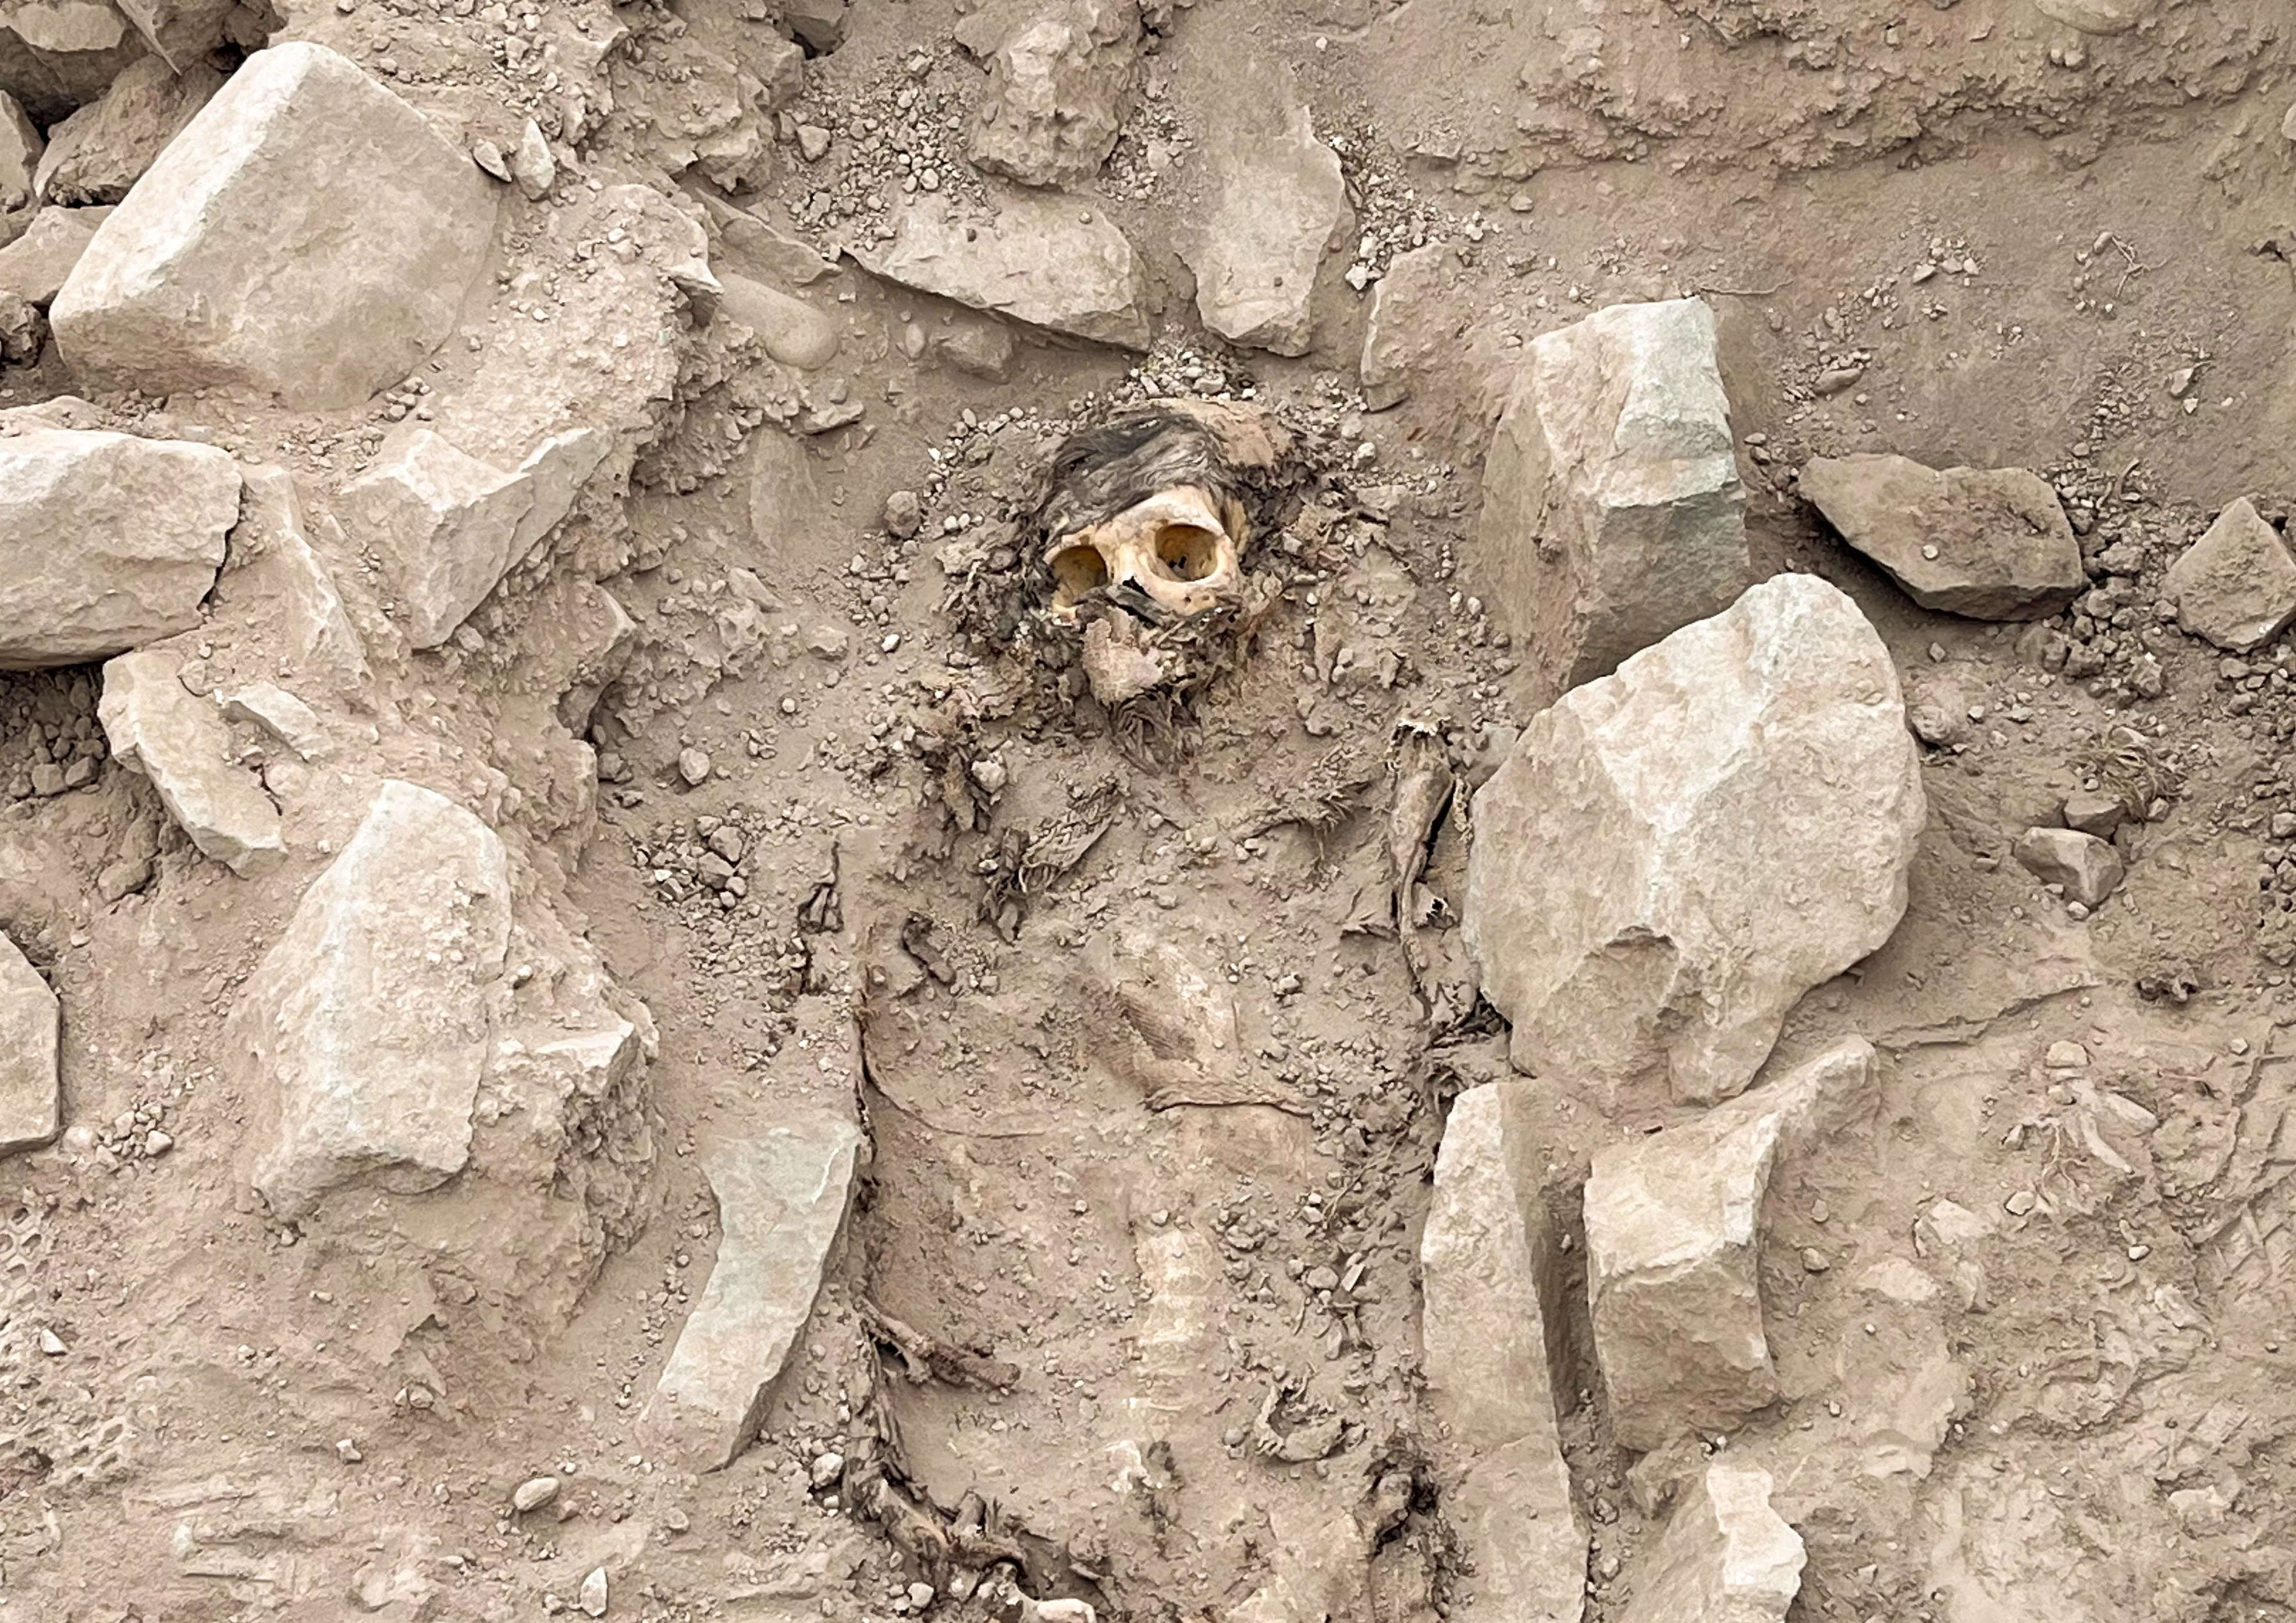 3,000-year-old Peruvian mummy found under trash dump may have been left as a sacrifice | Business Insider India